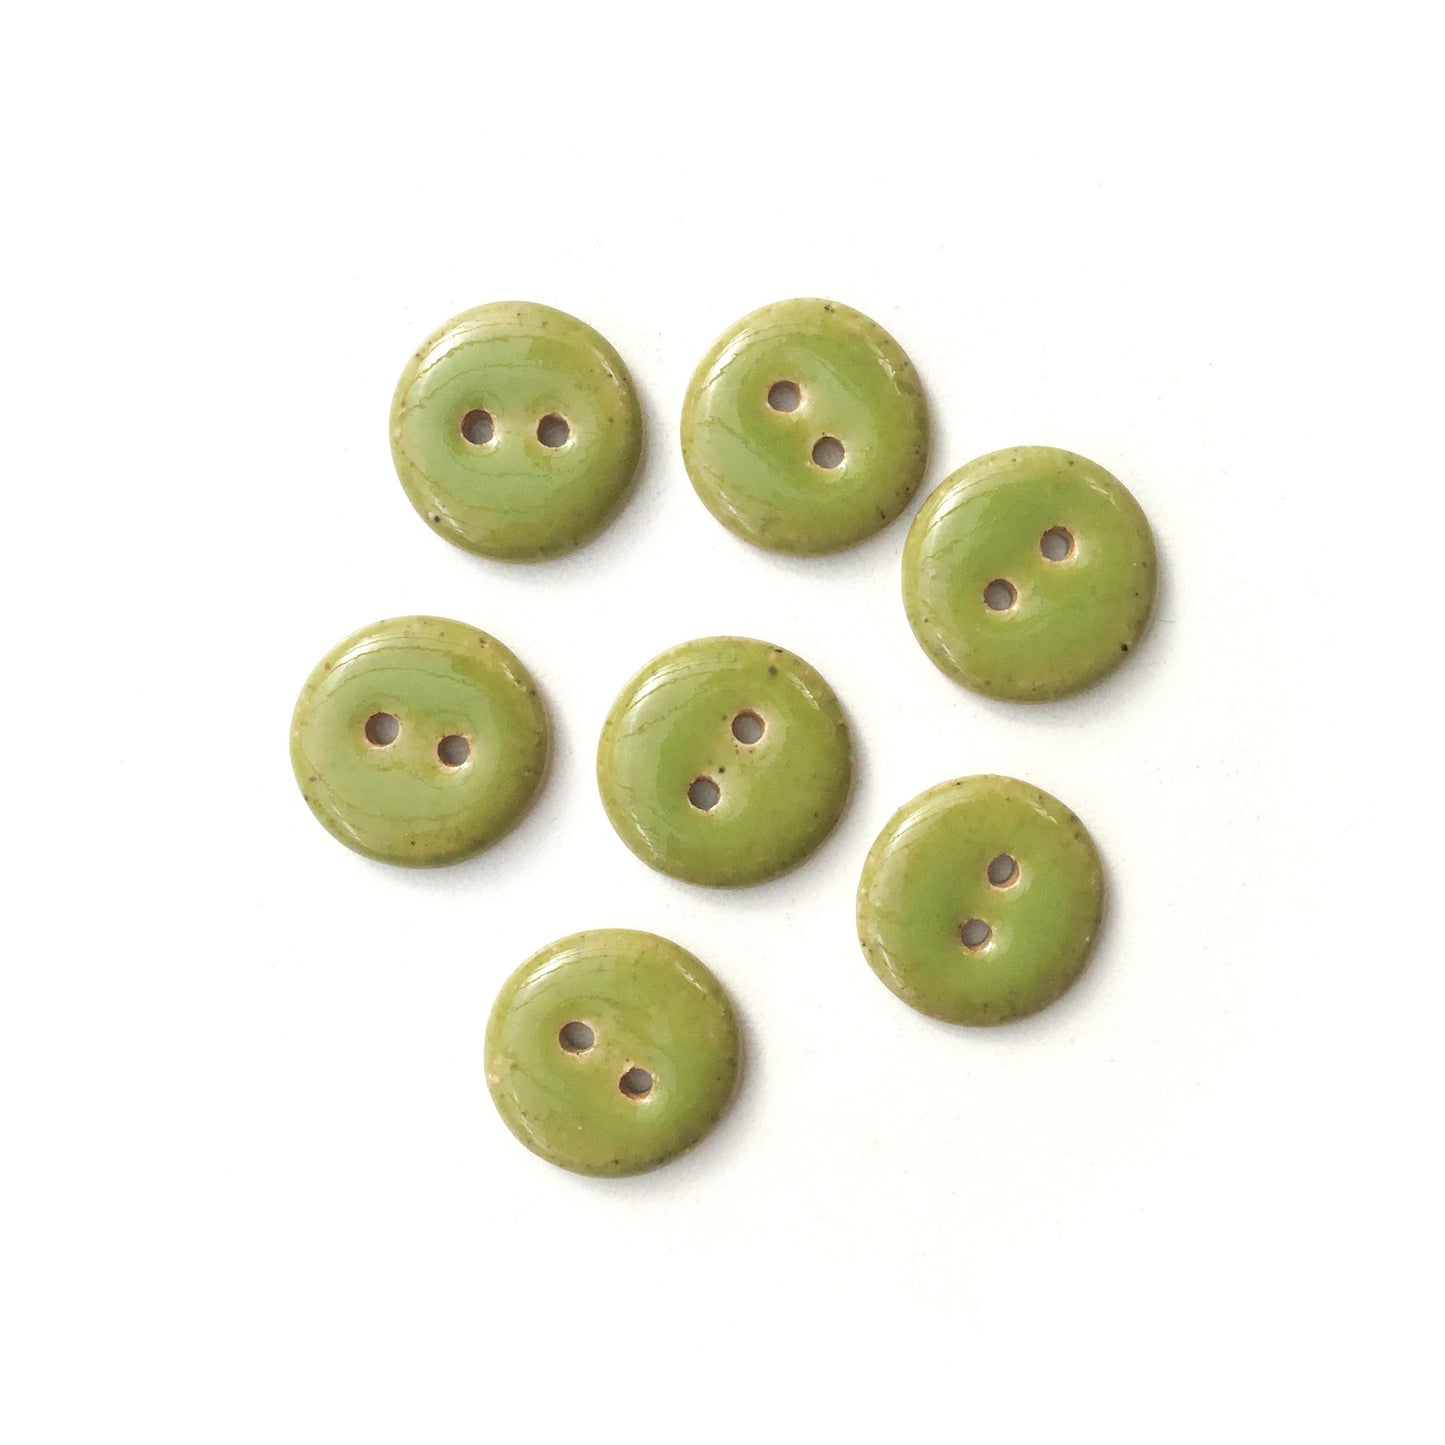 Olive Green Ceramic Stoneware Buttons  5/8" - 7 Pack